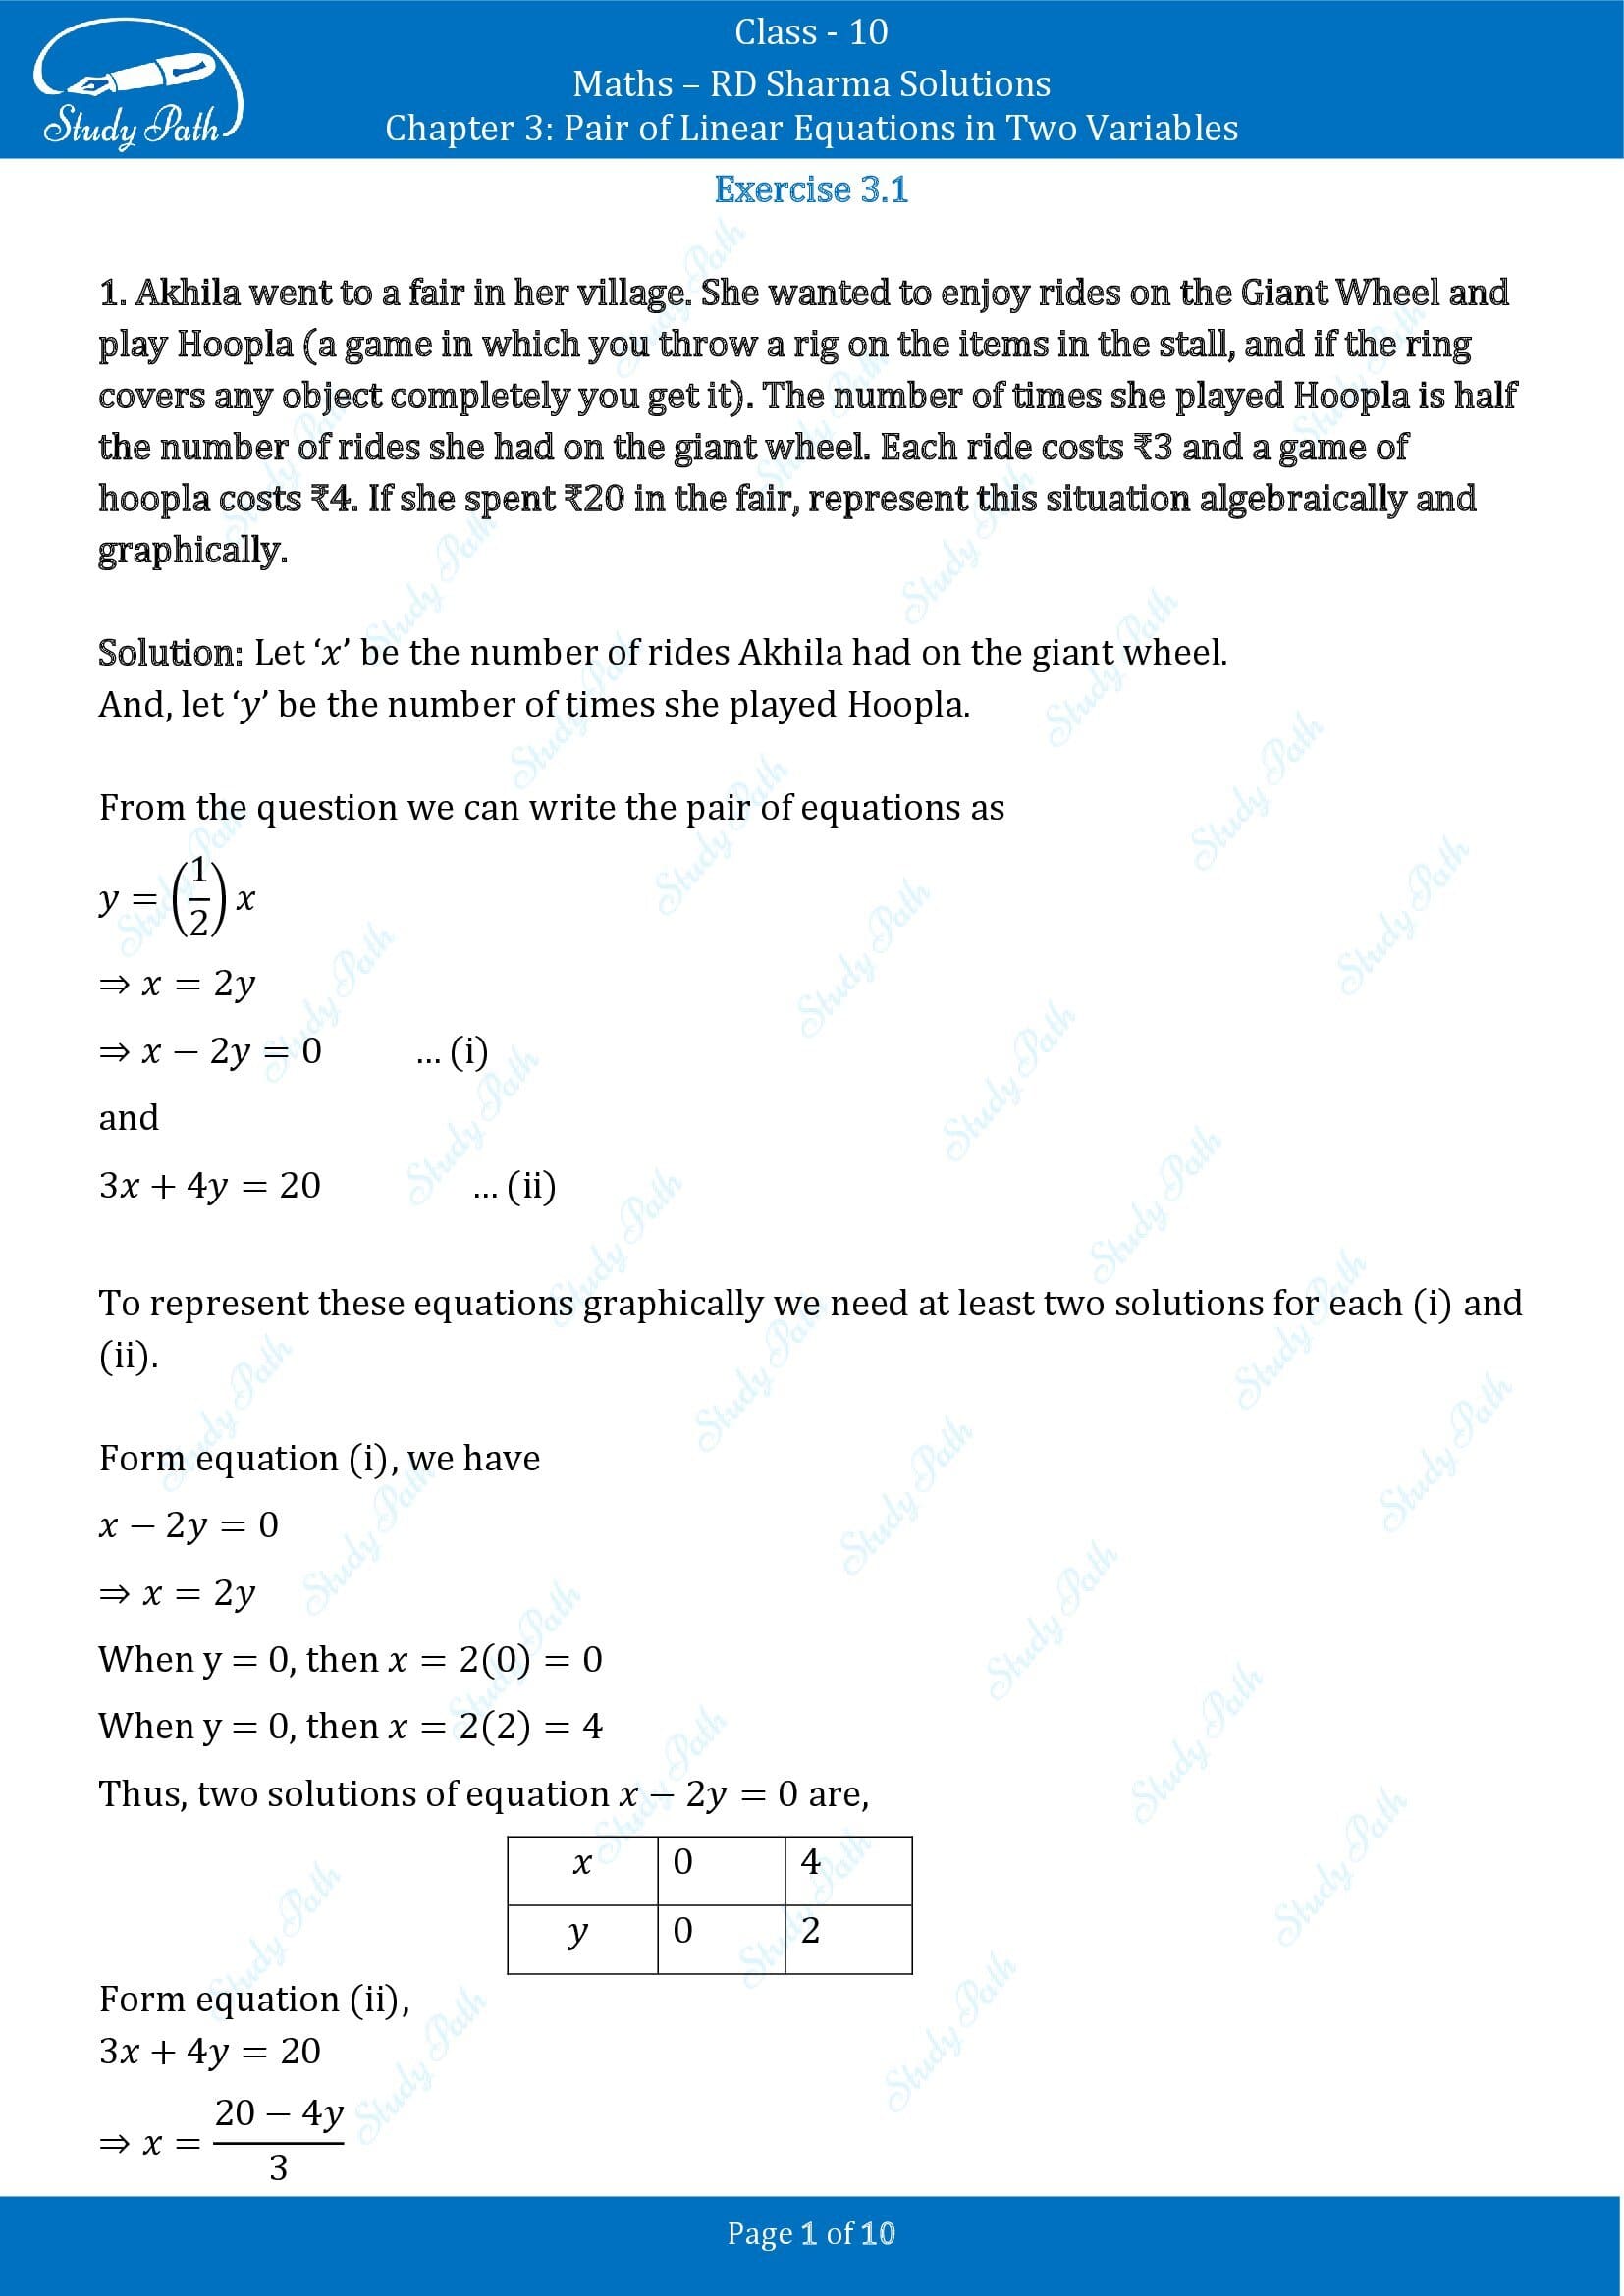 RD Sharma Solutions Class 10 Chapter 3 Pair of Linear Equations in Two Variables Exercise 3.1 00001